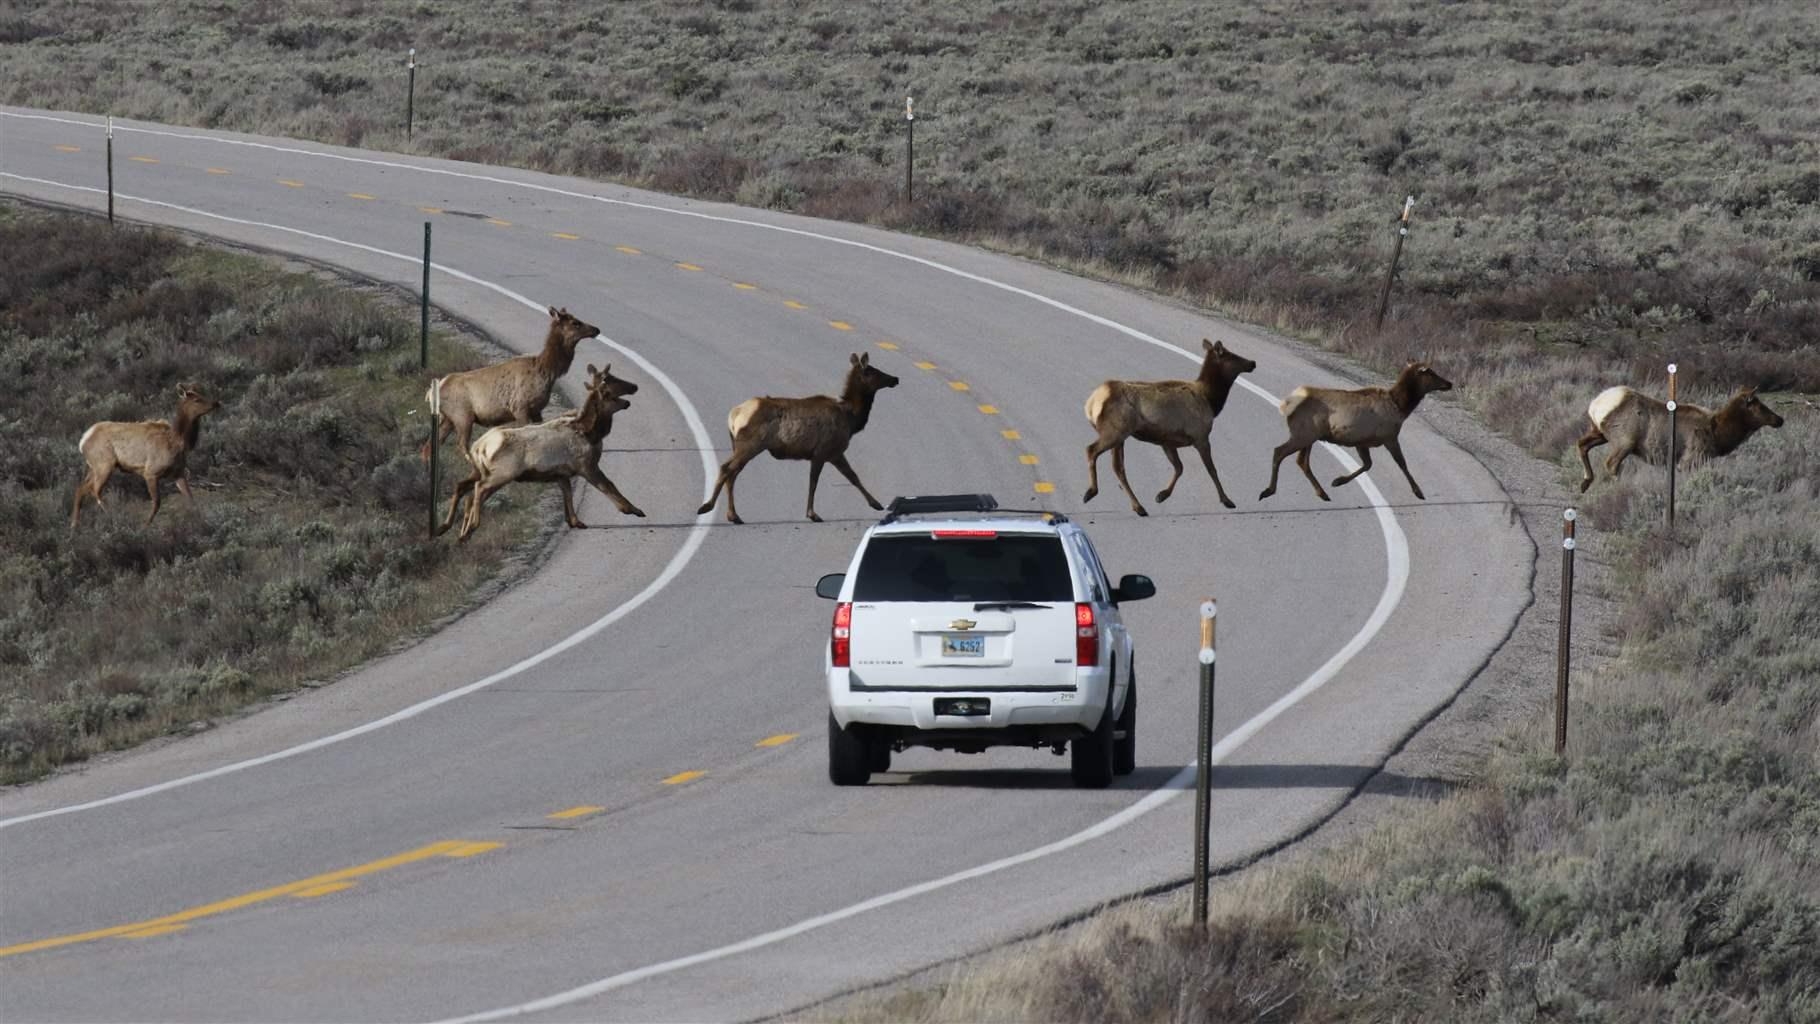 Seven elk cross a curved, two-lane road in front of a white SUV.